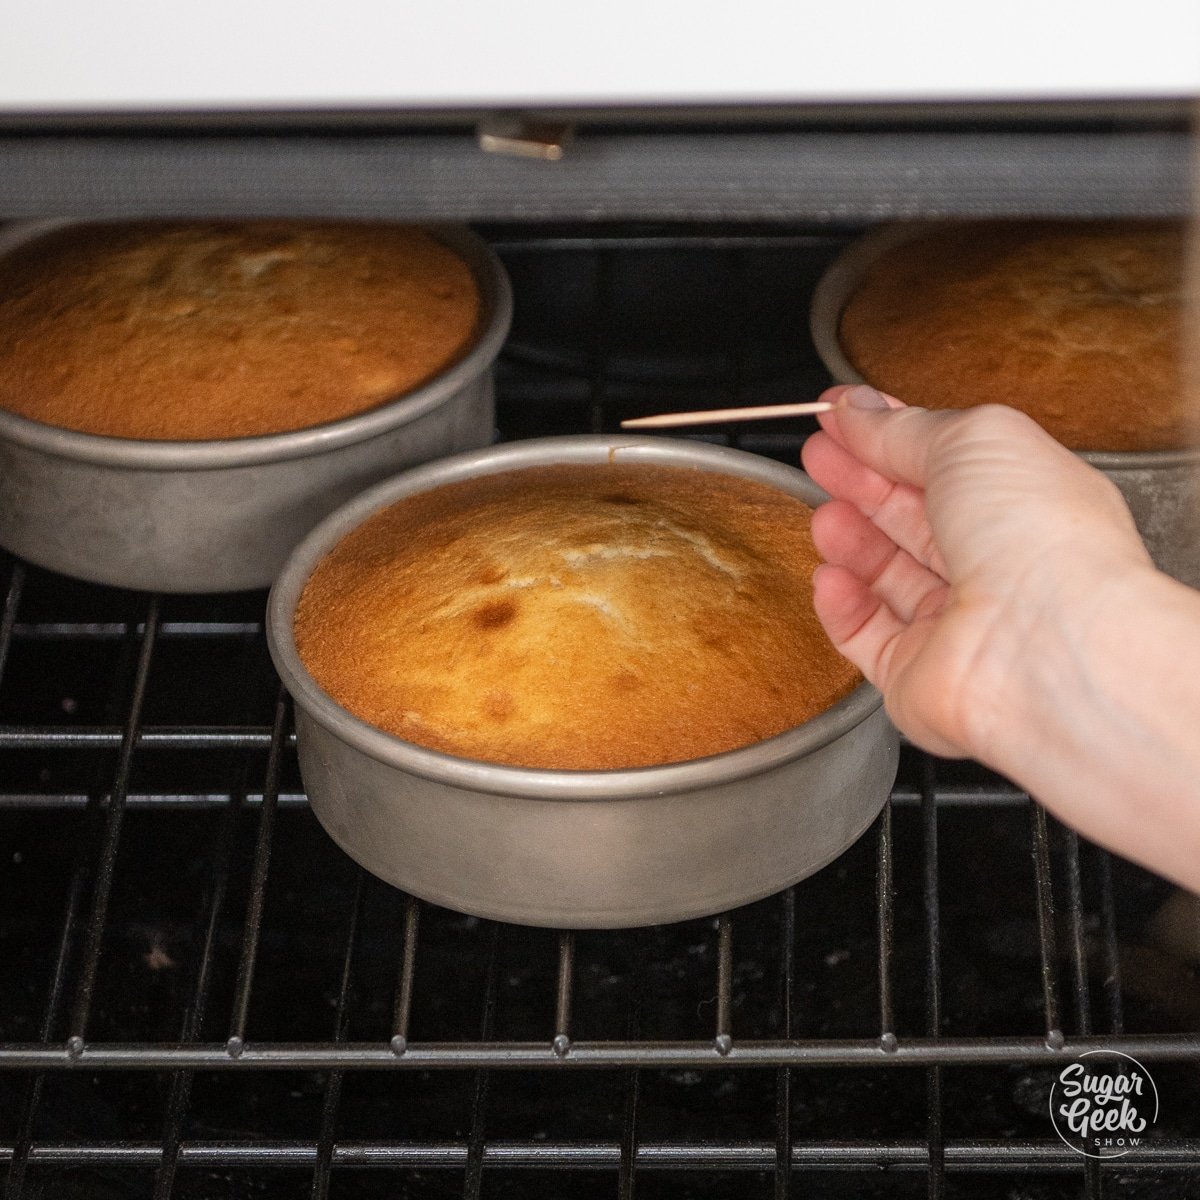 clean toothpick coming out of a baked cake in the oven